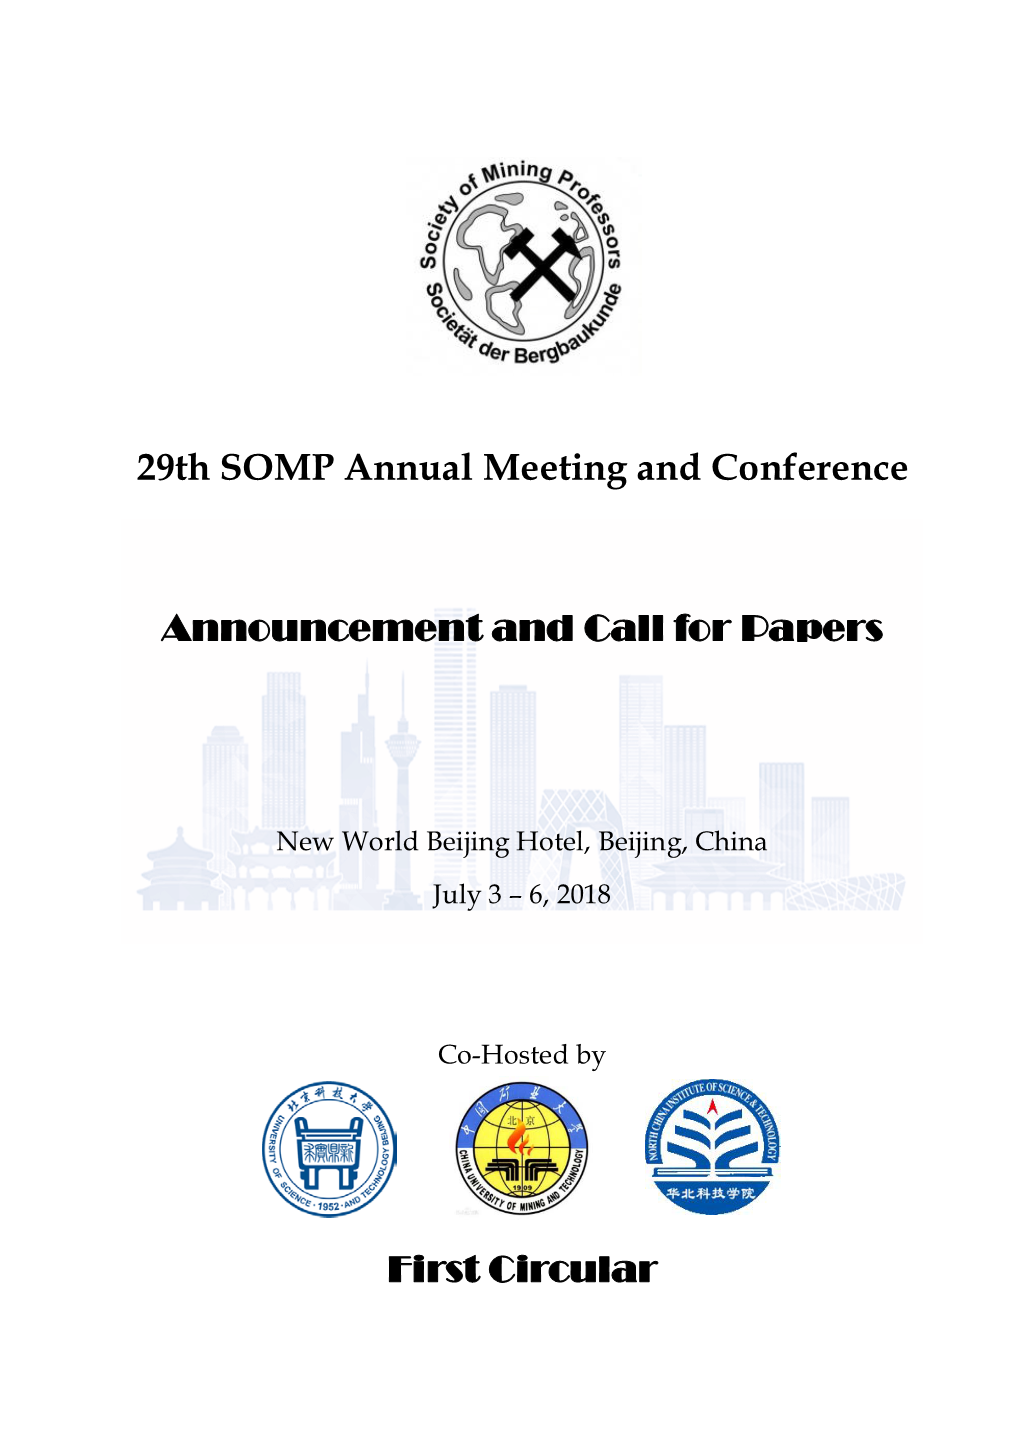 29Th SOMP Annual Meeting and Conference Announcement And